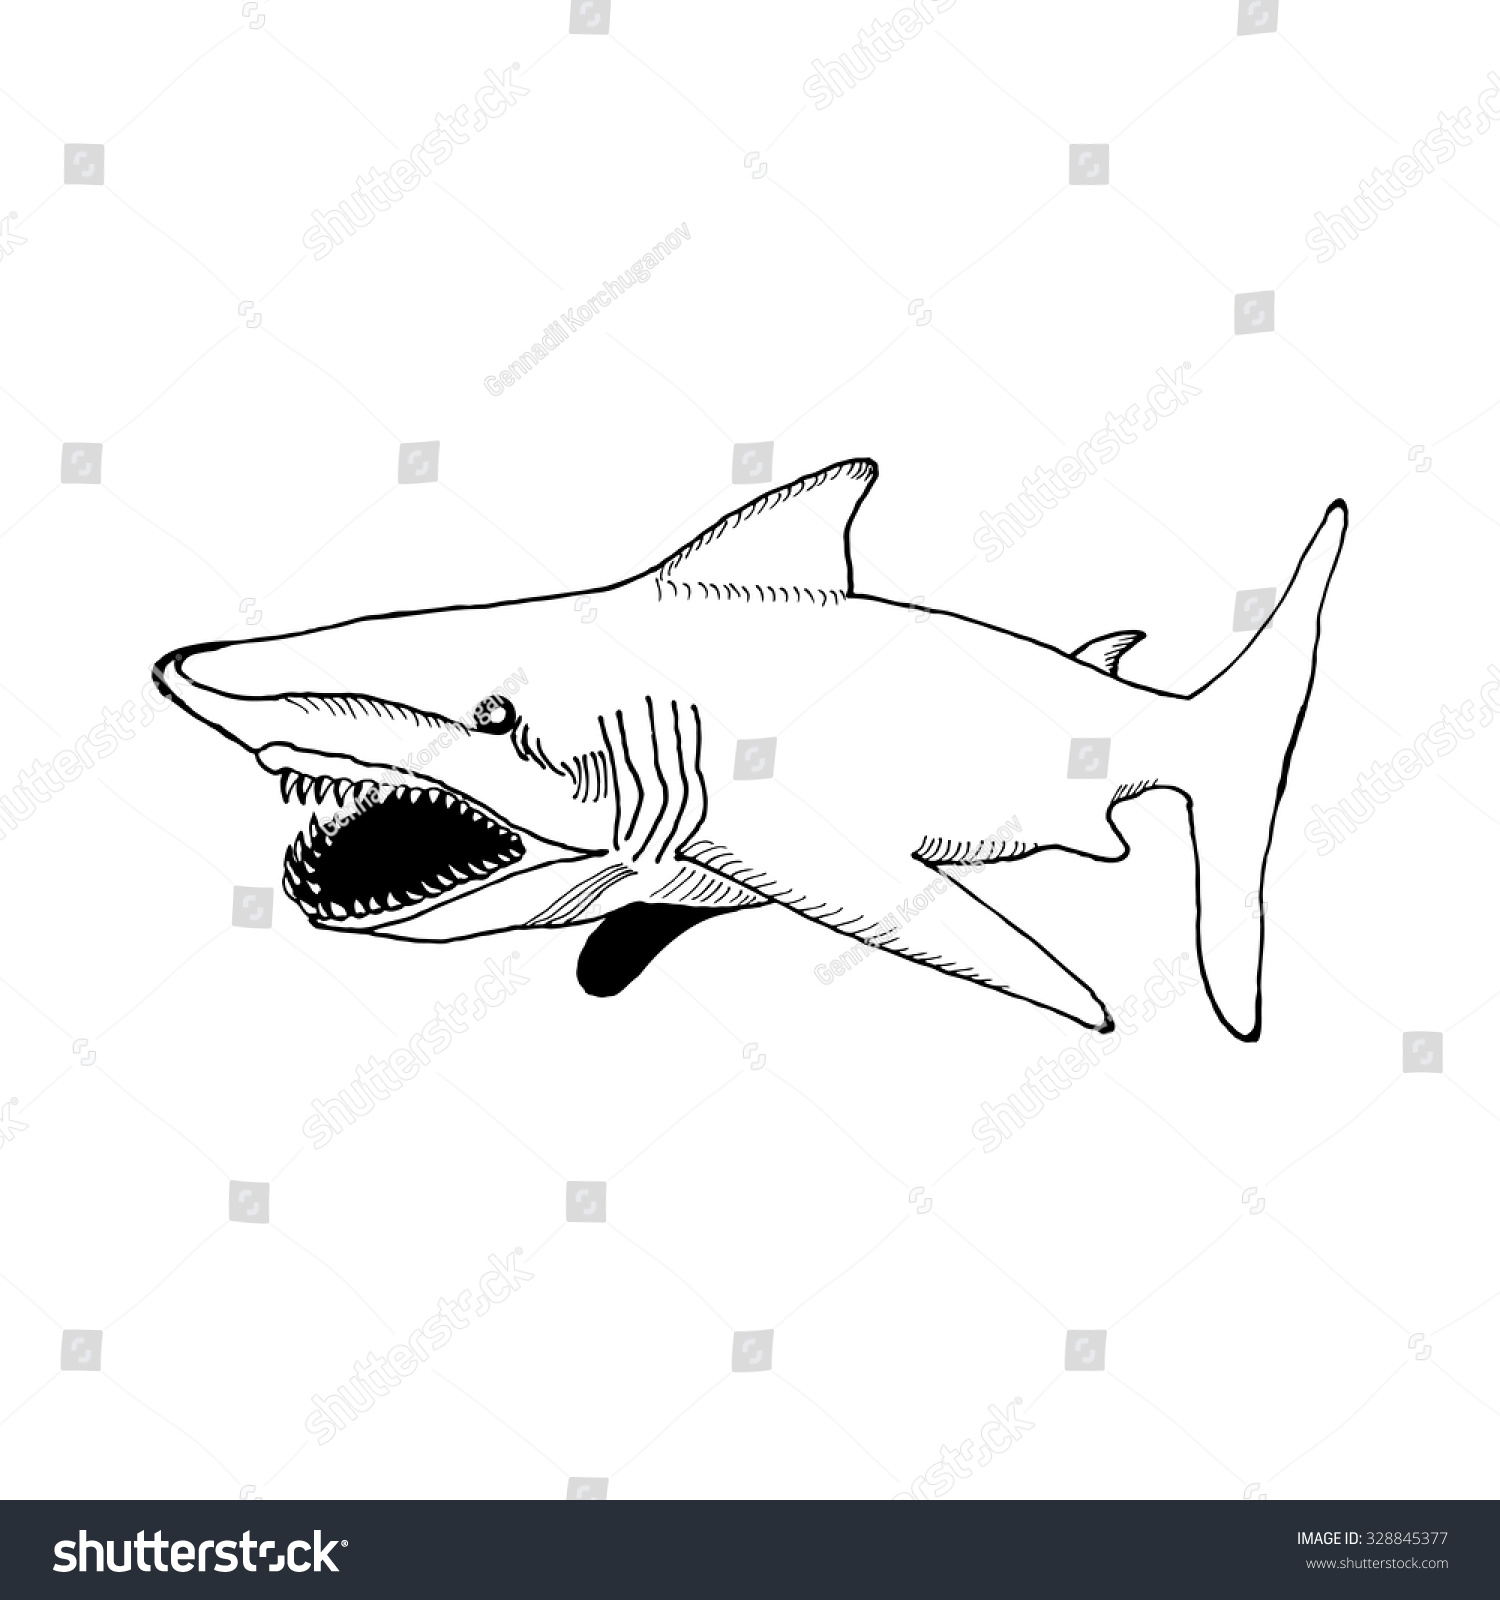 Hand Draw A Shark With An Open Mouth And Sharp Teeth In The Style Of A ...